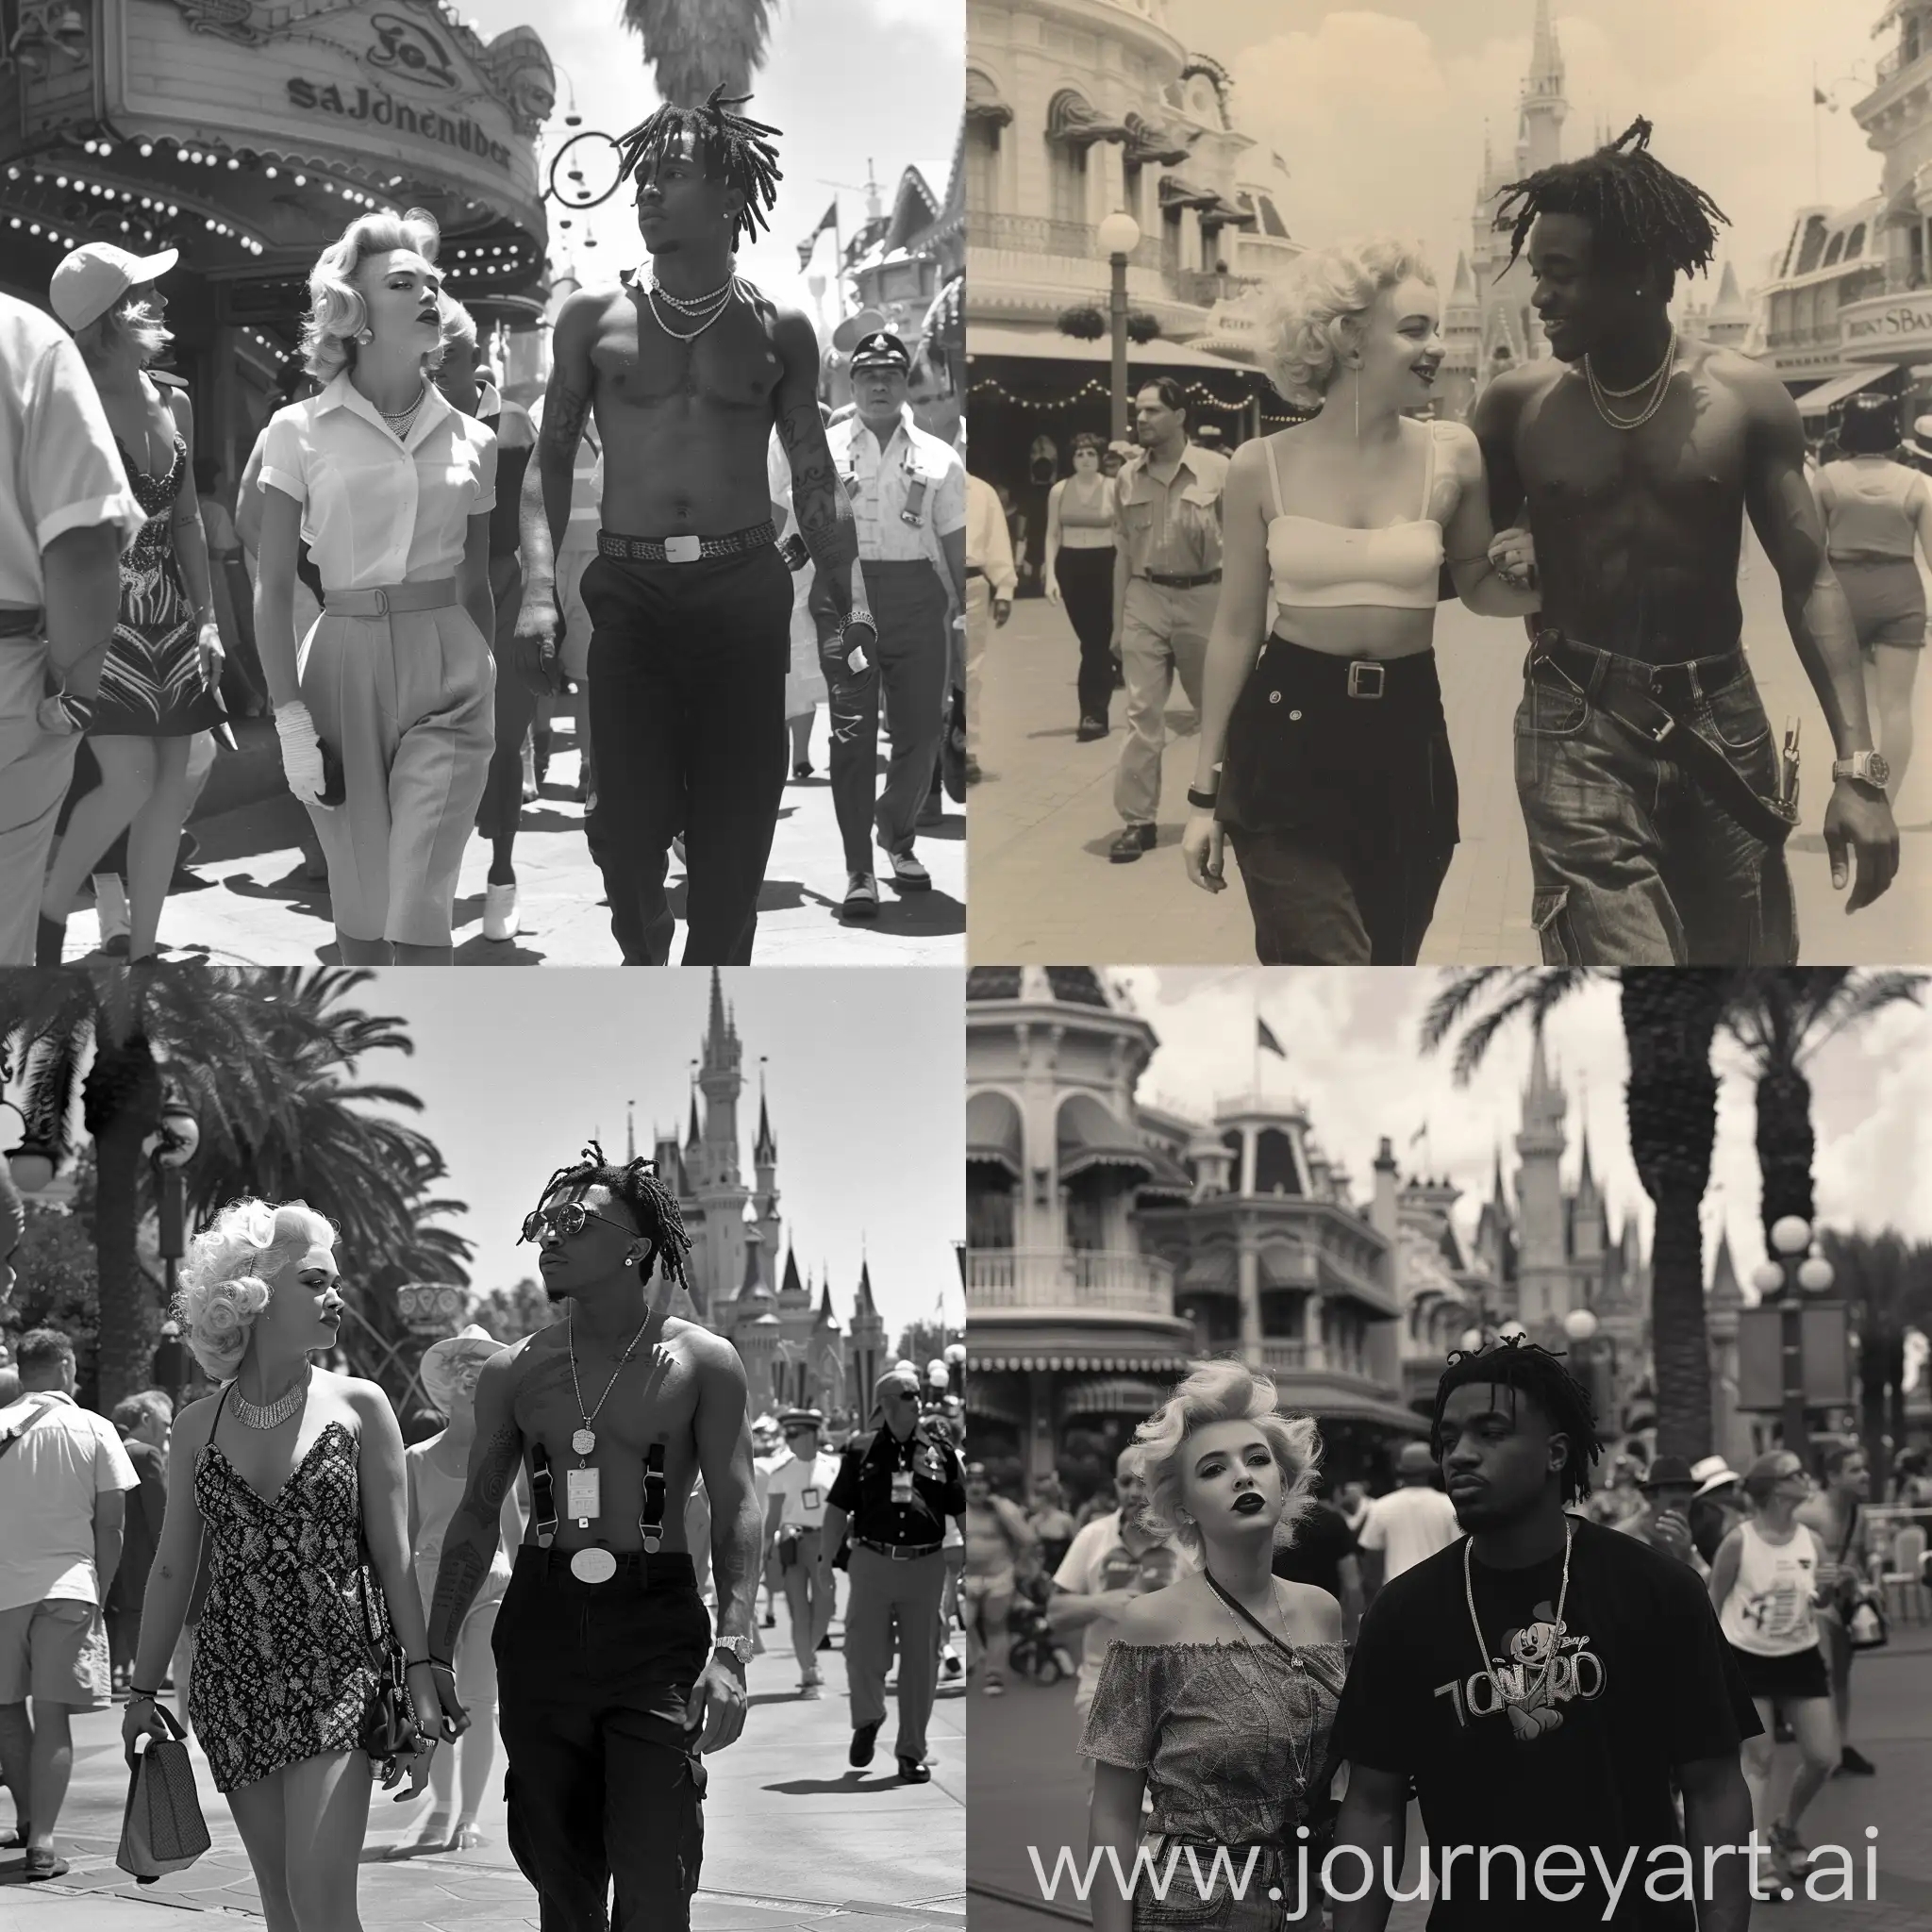 Juice-WRLD-with-Marilyn-Monroe-at-Disney-1960s-Black-and-White-Photograph